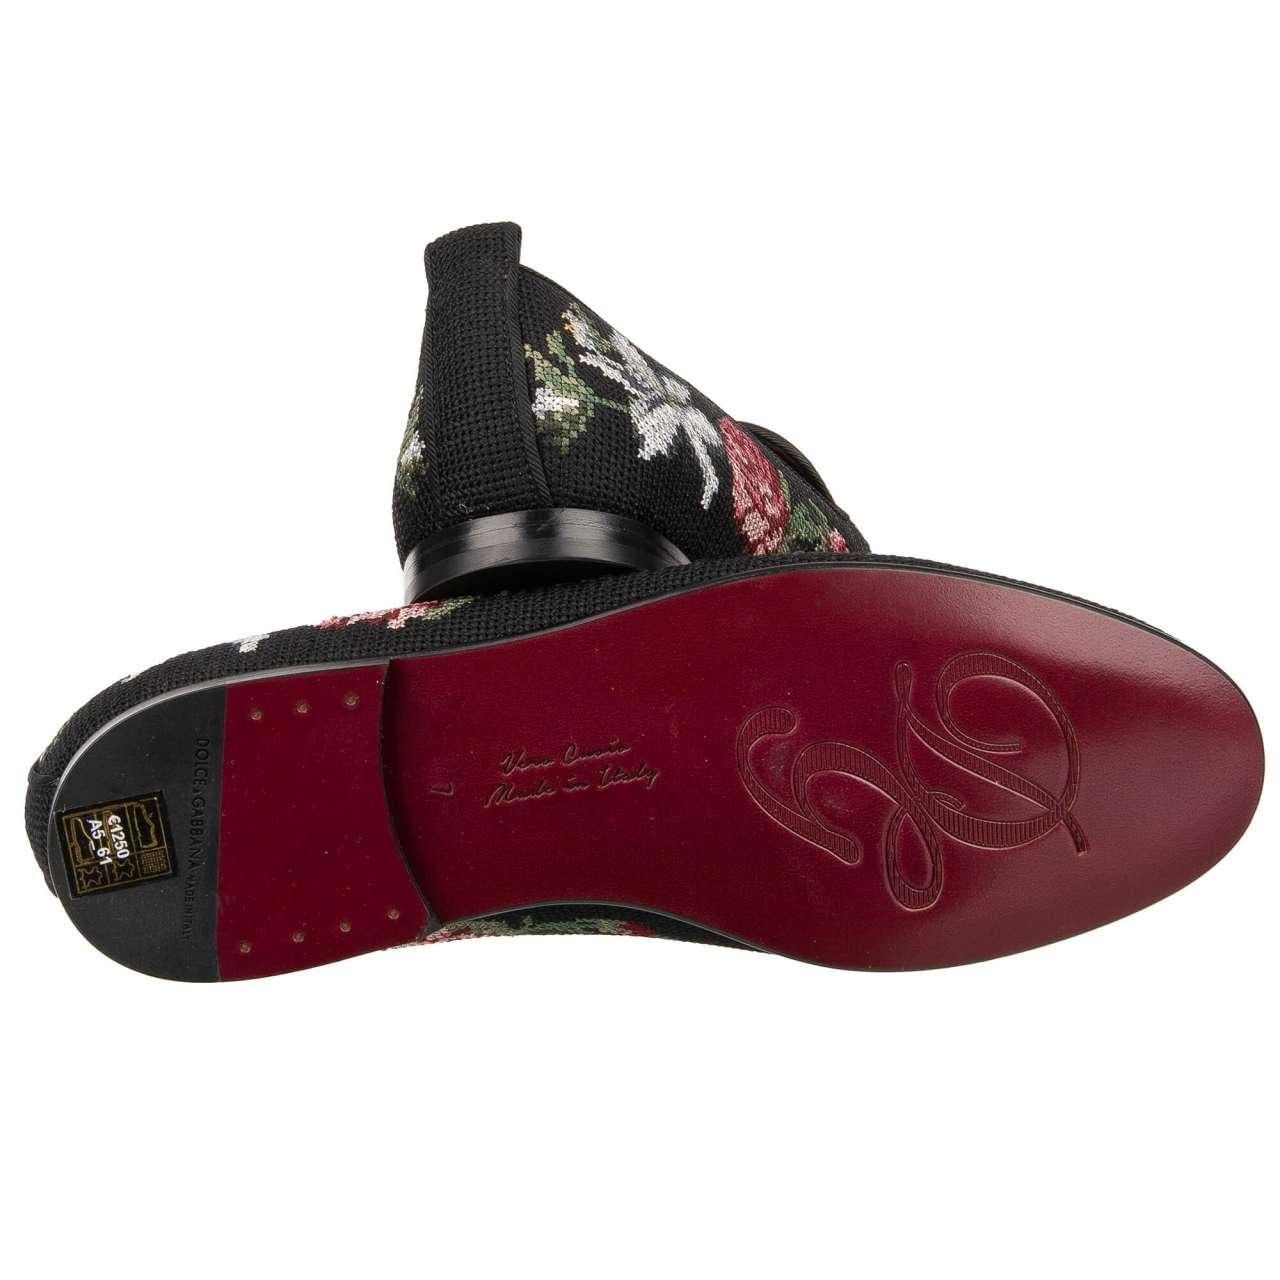 Dolce & Gabbana Baroque Crown Rose Angel Loafer YOUNG POPE Black EUR 41 For Sale 1